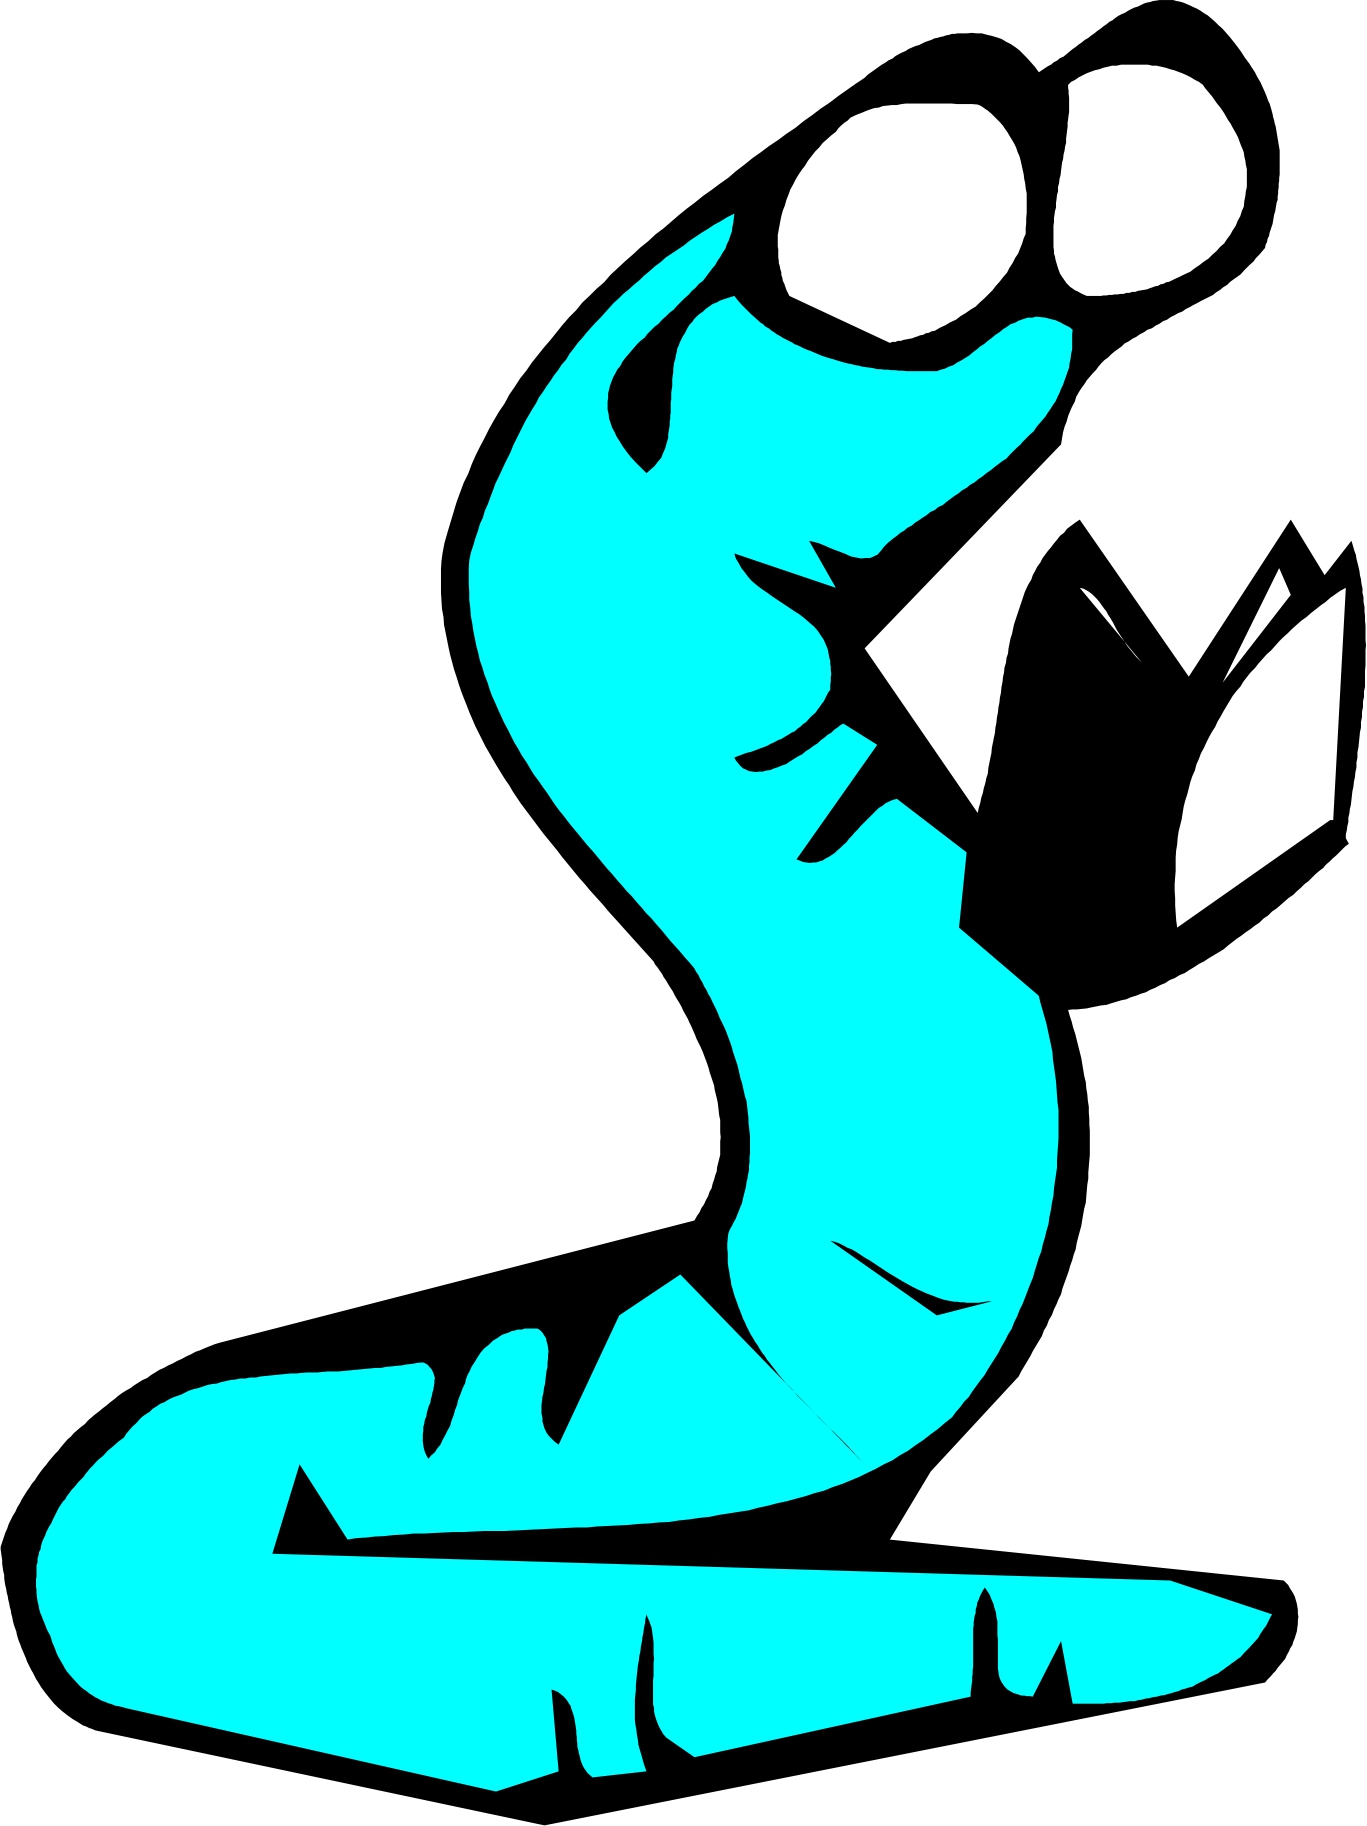 book worm clipart - photo #30